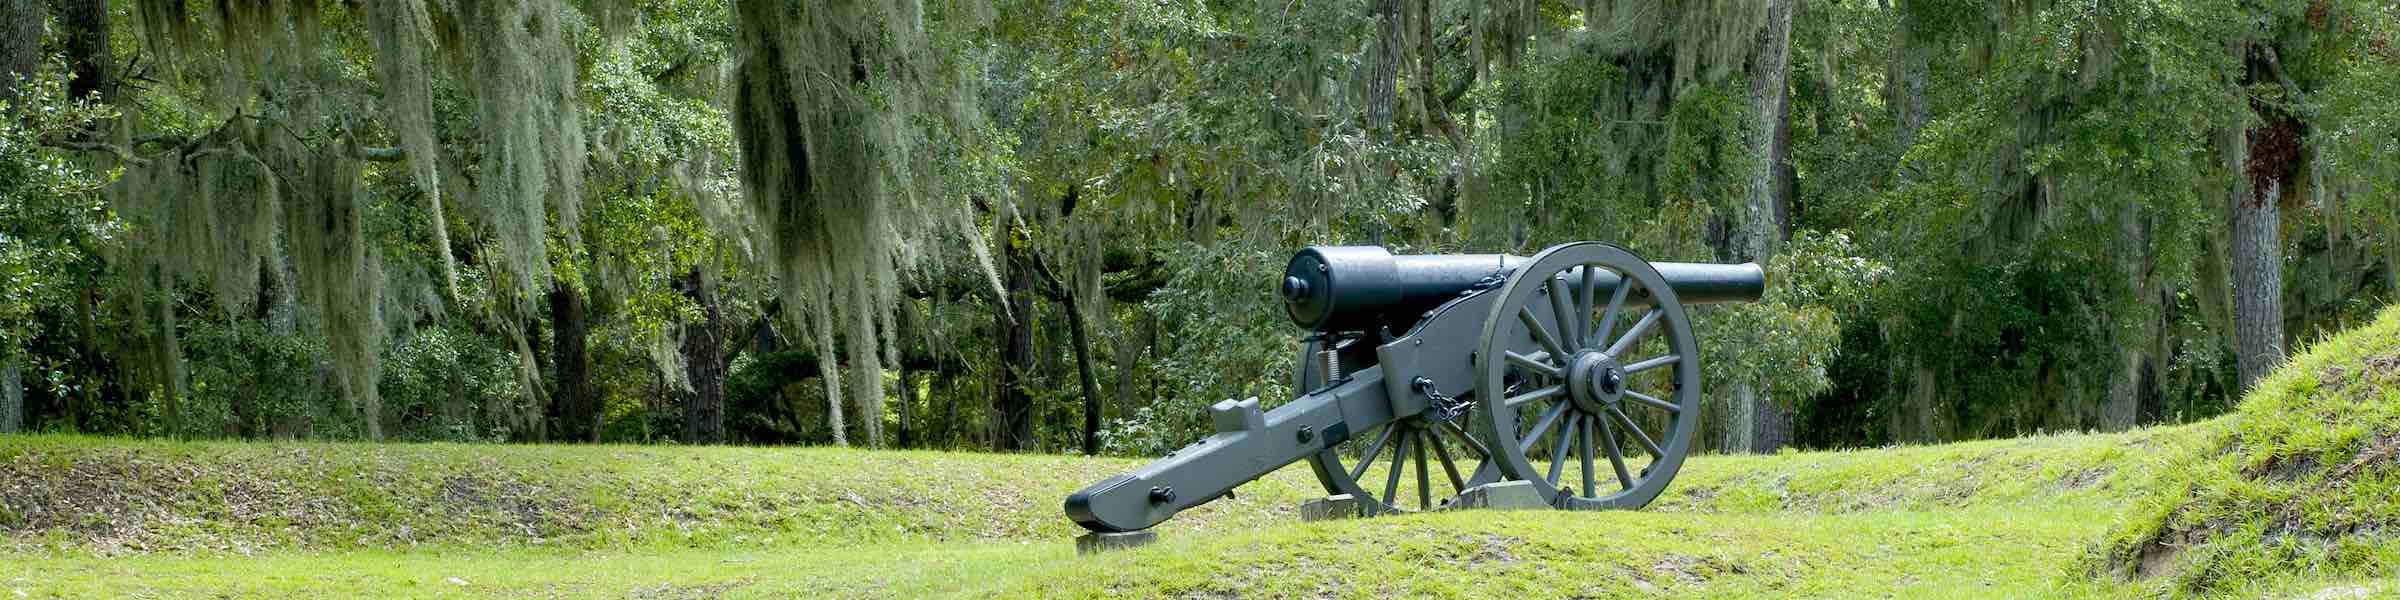 Historic cannon and earthworks at Fort McAllister, Richmond Hill, GA.